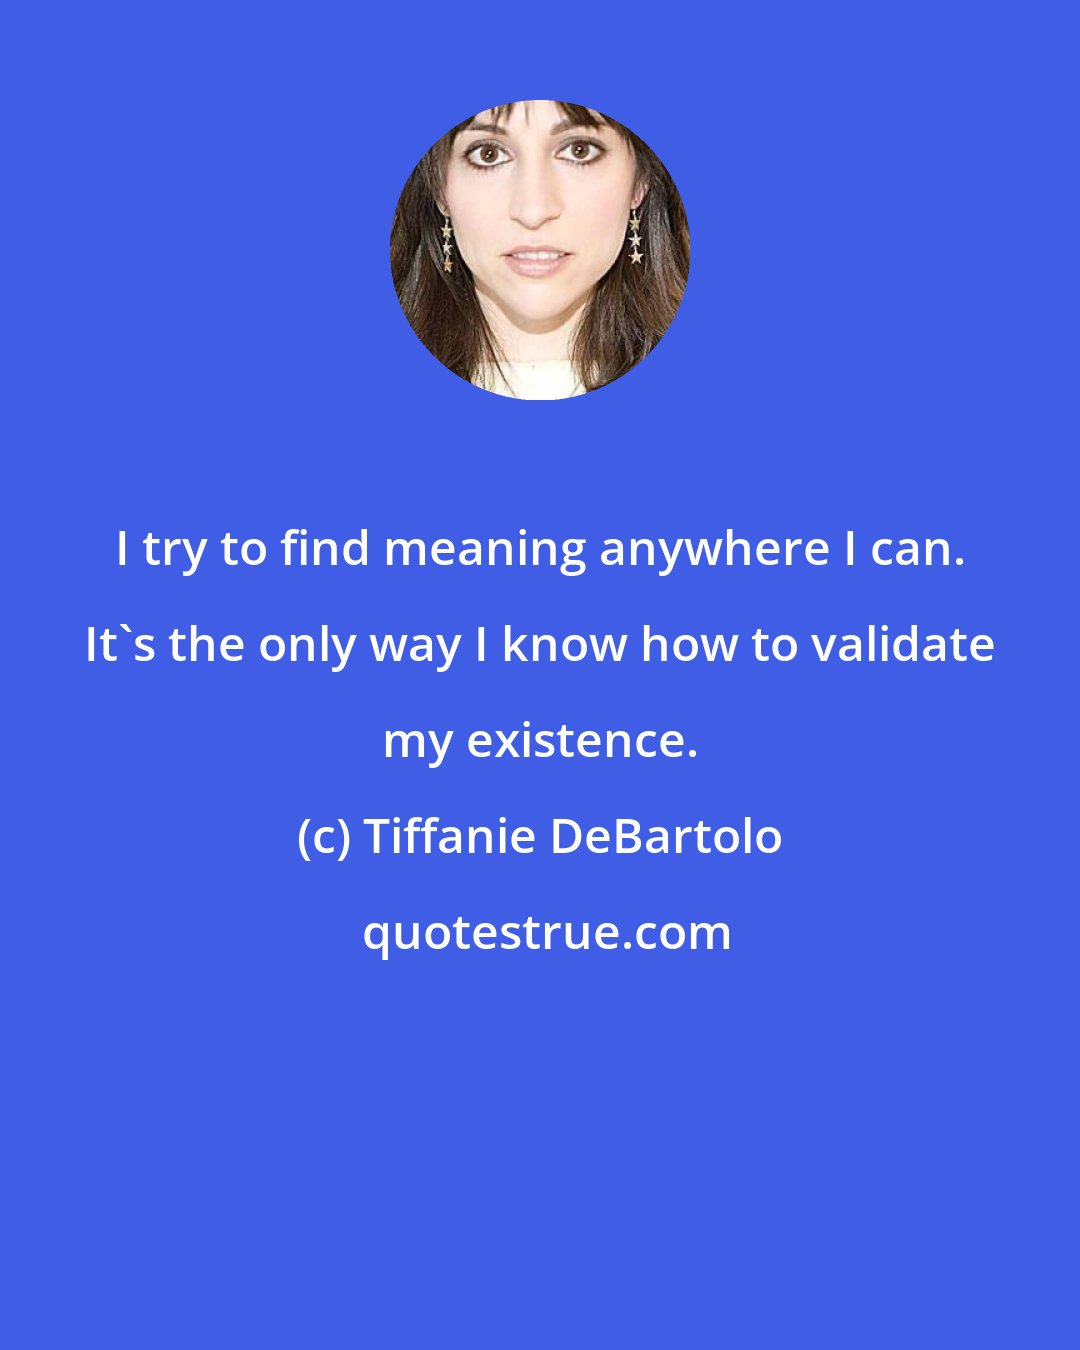 Tiffanie DeBartolo: I try to find meaning anywhere I can. It's the only way I know how to validate my existence.